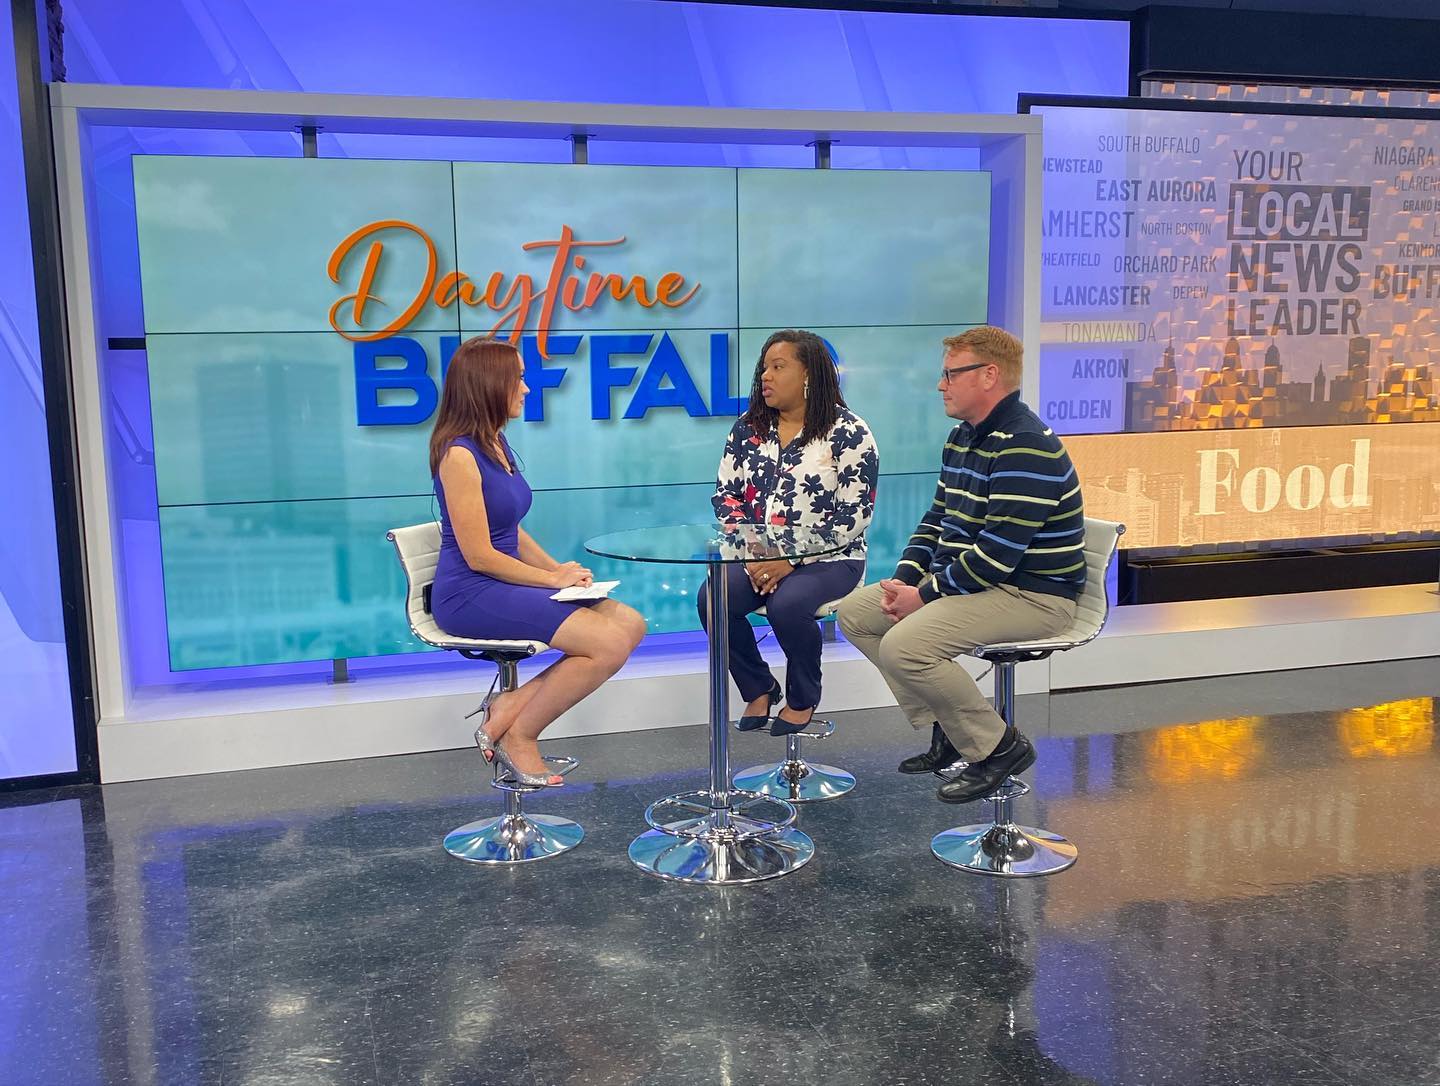 Homespace Featured on Daytime Buffalo! Image